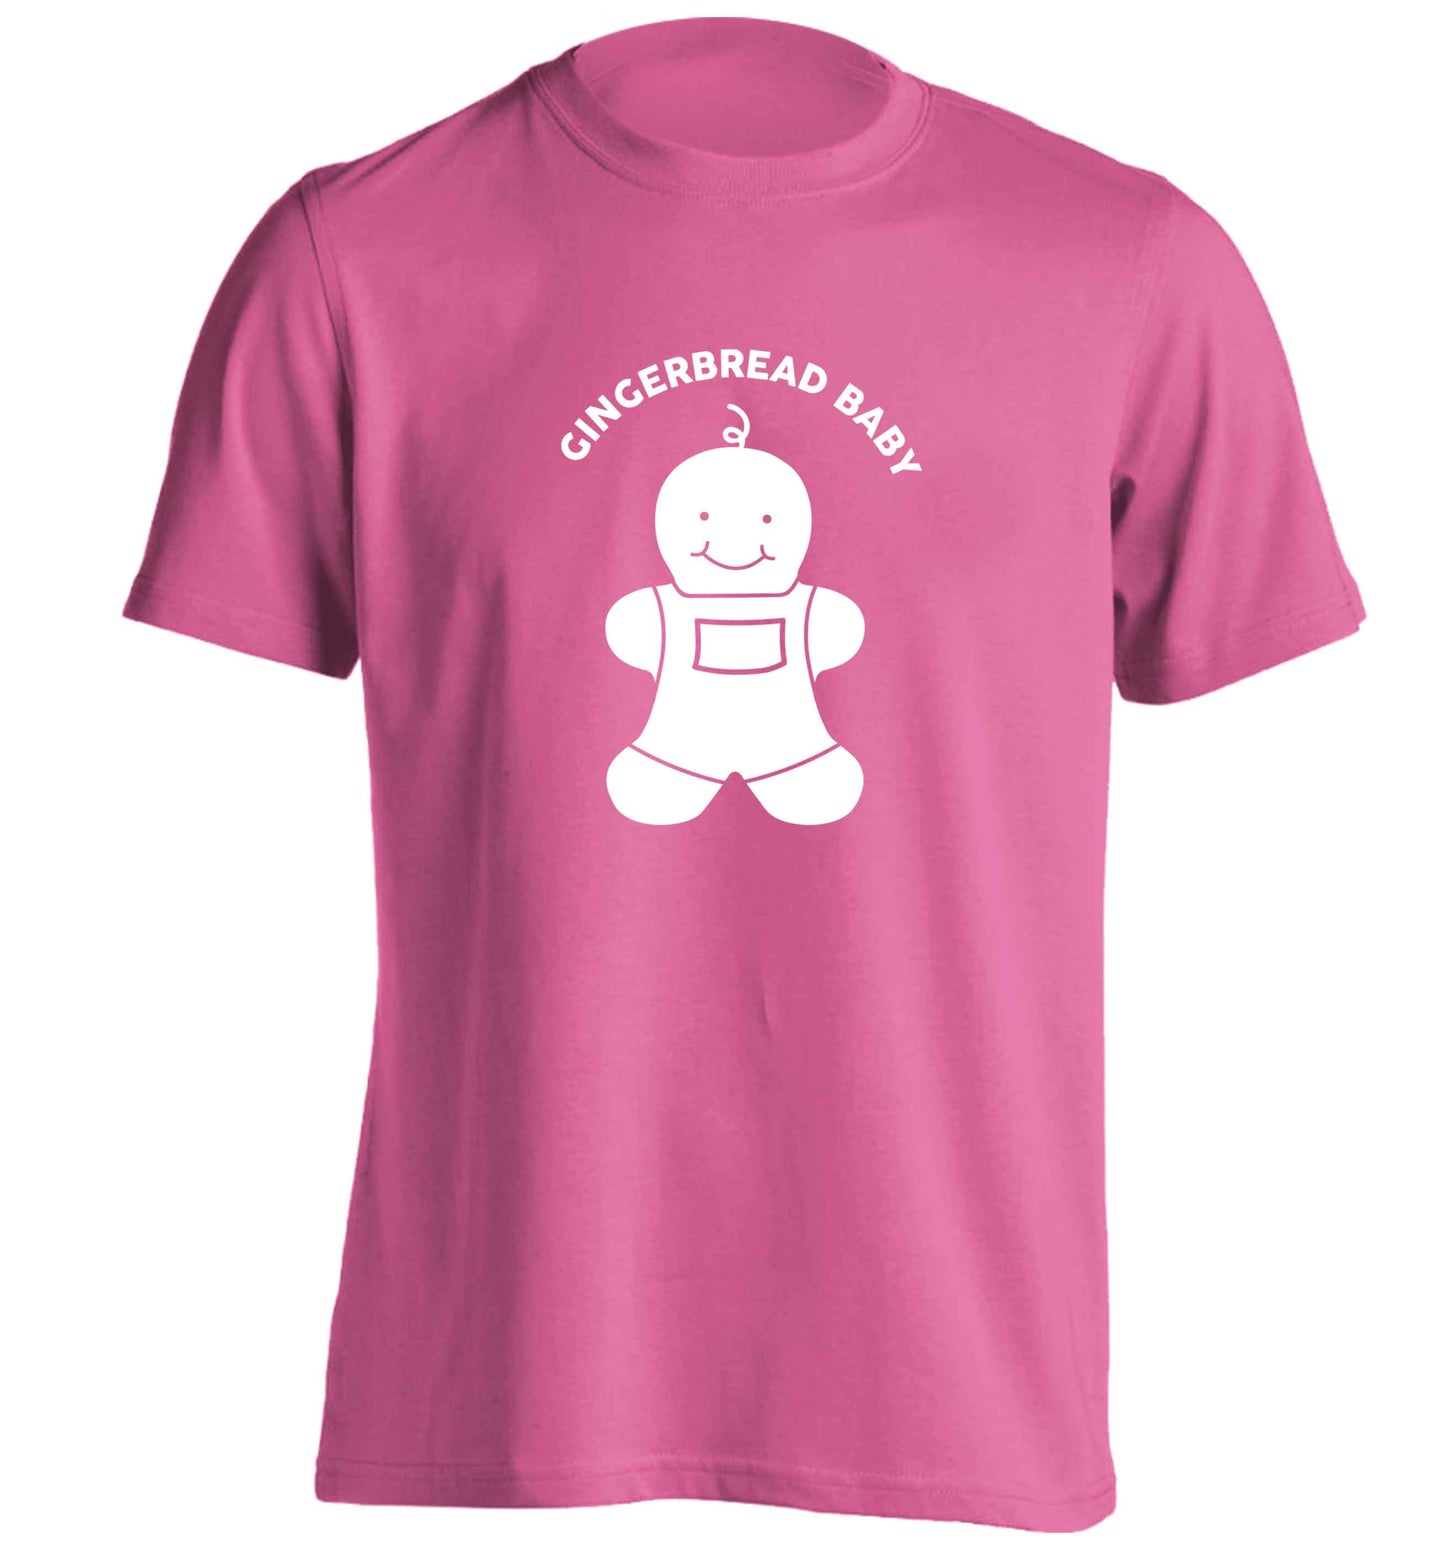 Gingerbread baby adults unisex pink Tshirt 2XL